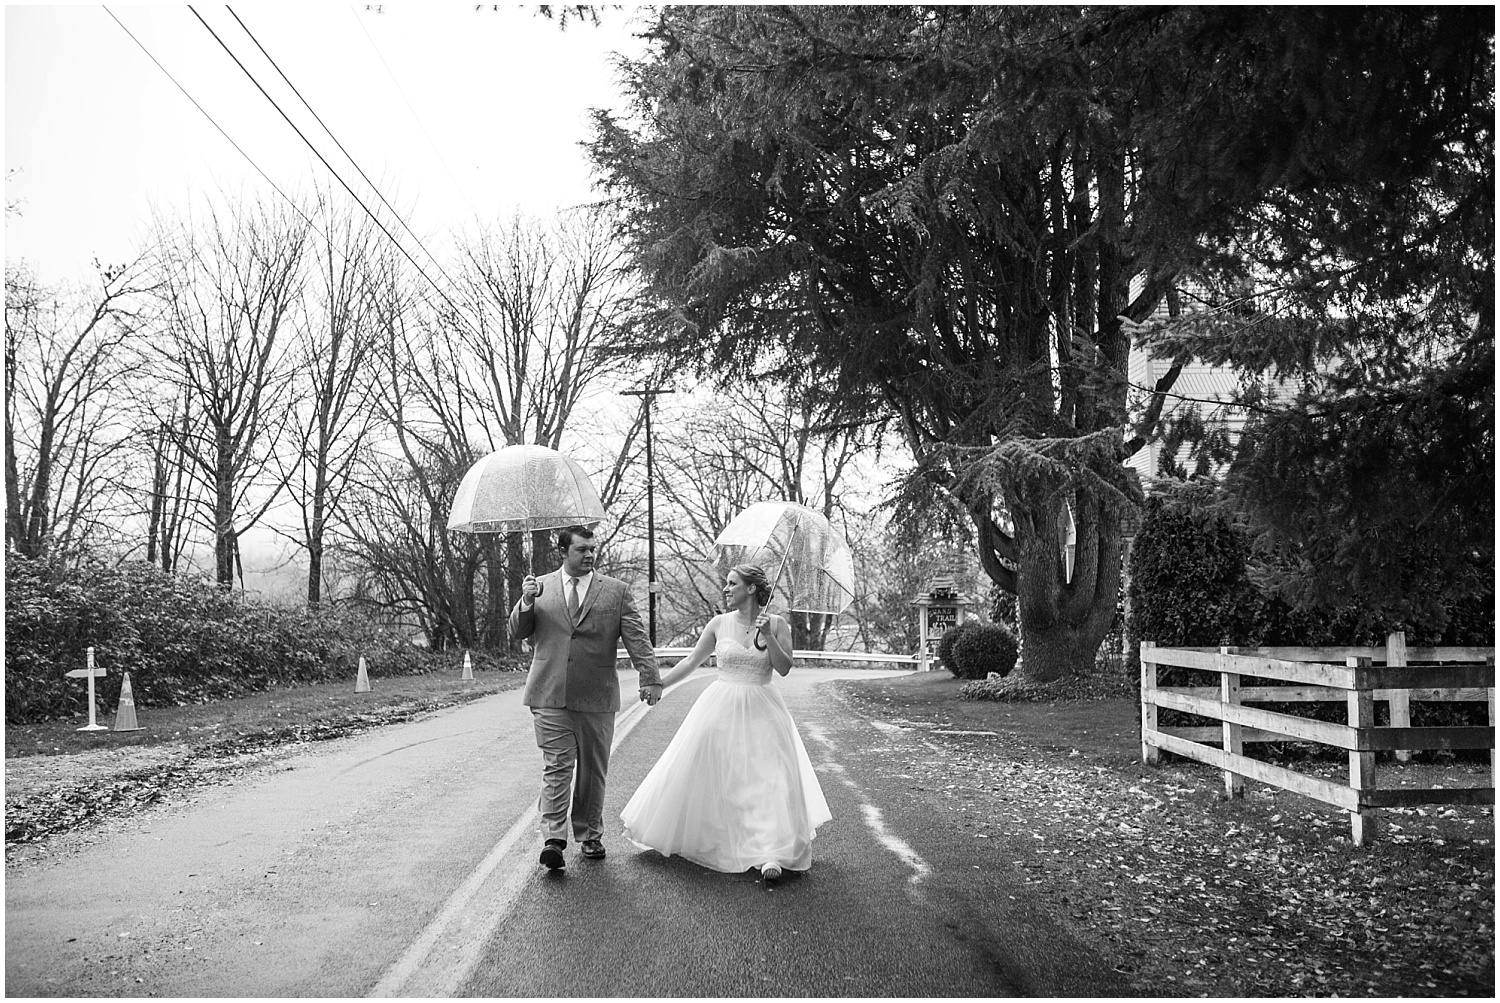 How to deal with rain on your wedding day: bride and groom with umbrellas.